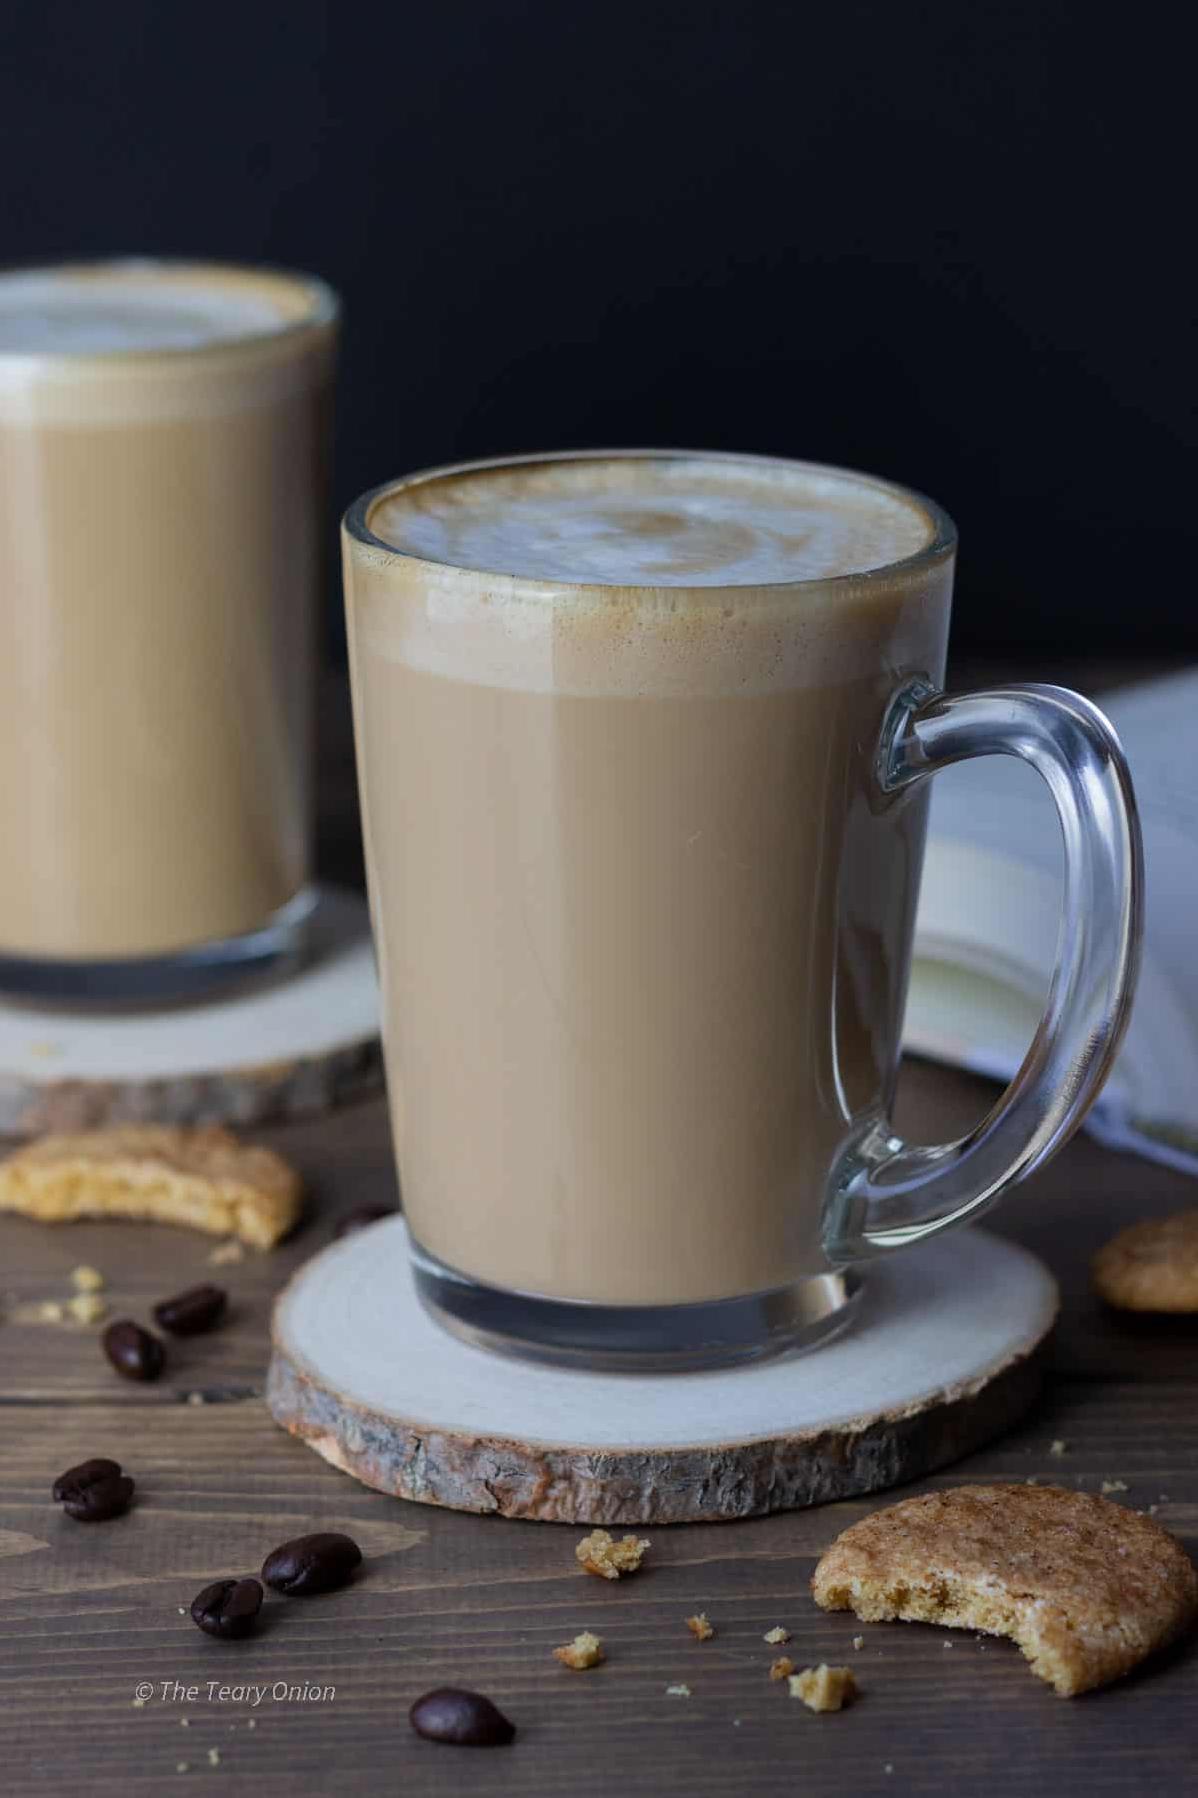  Make your mornings more luxurious with this Vanilla Latte recipe.